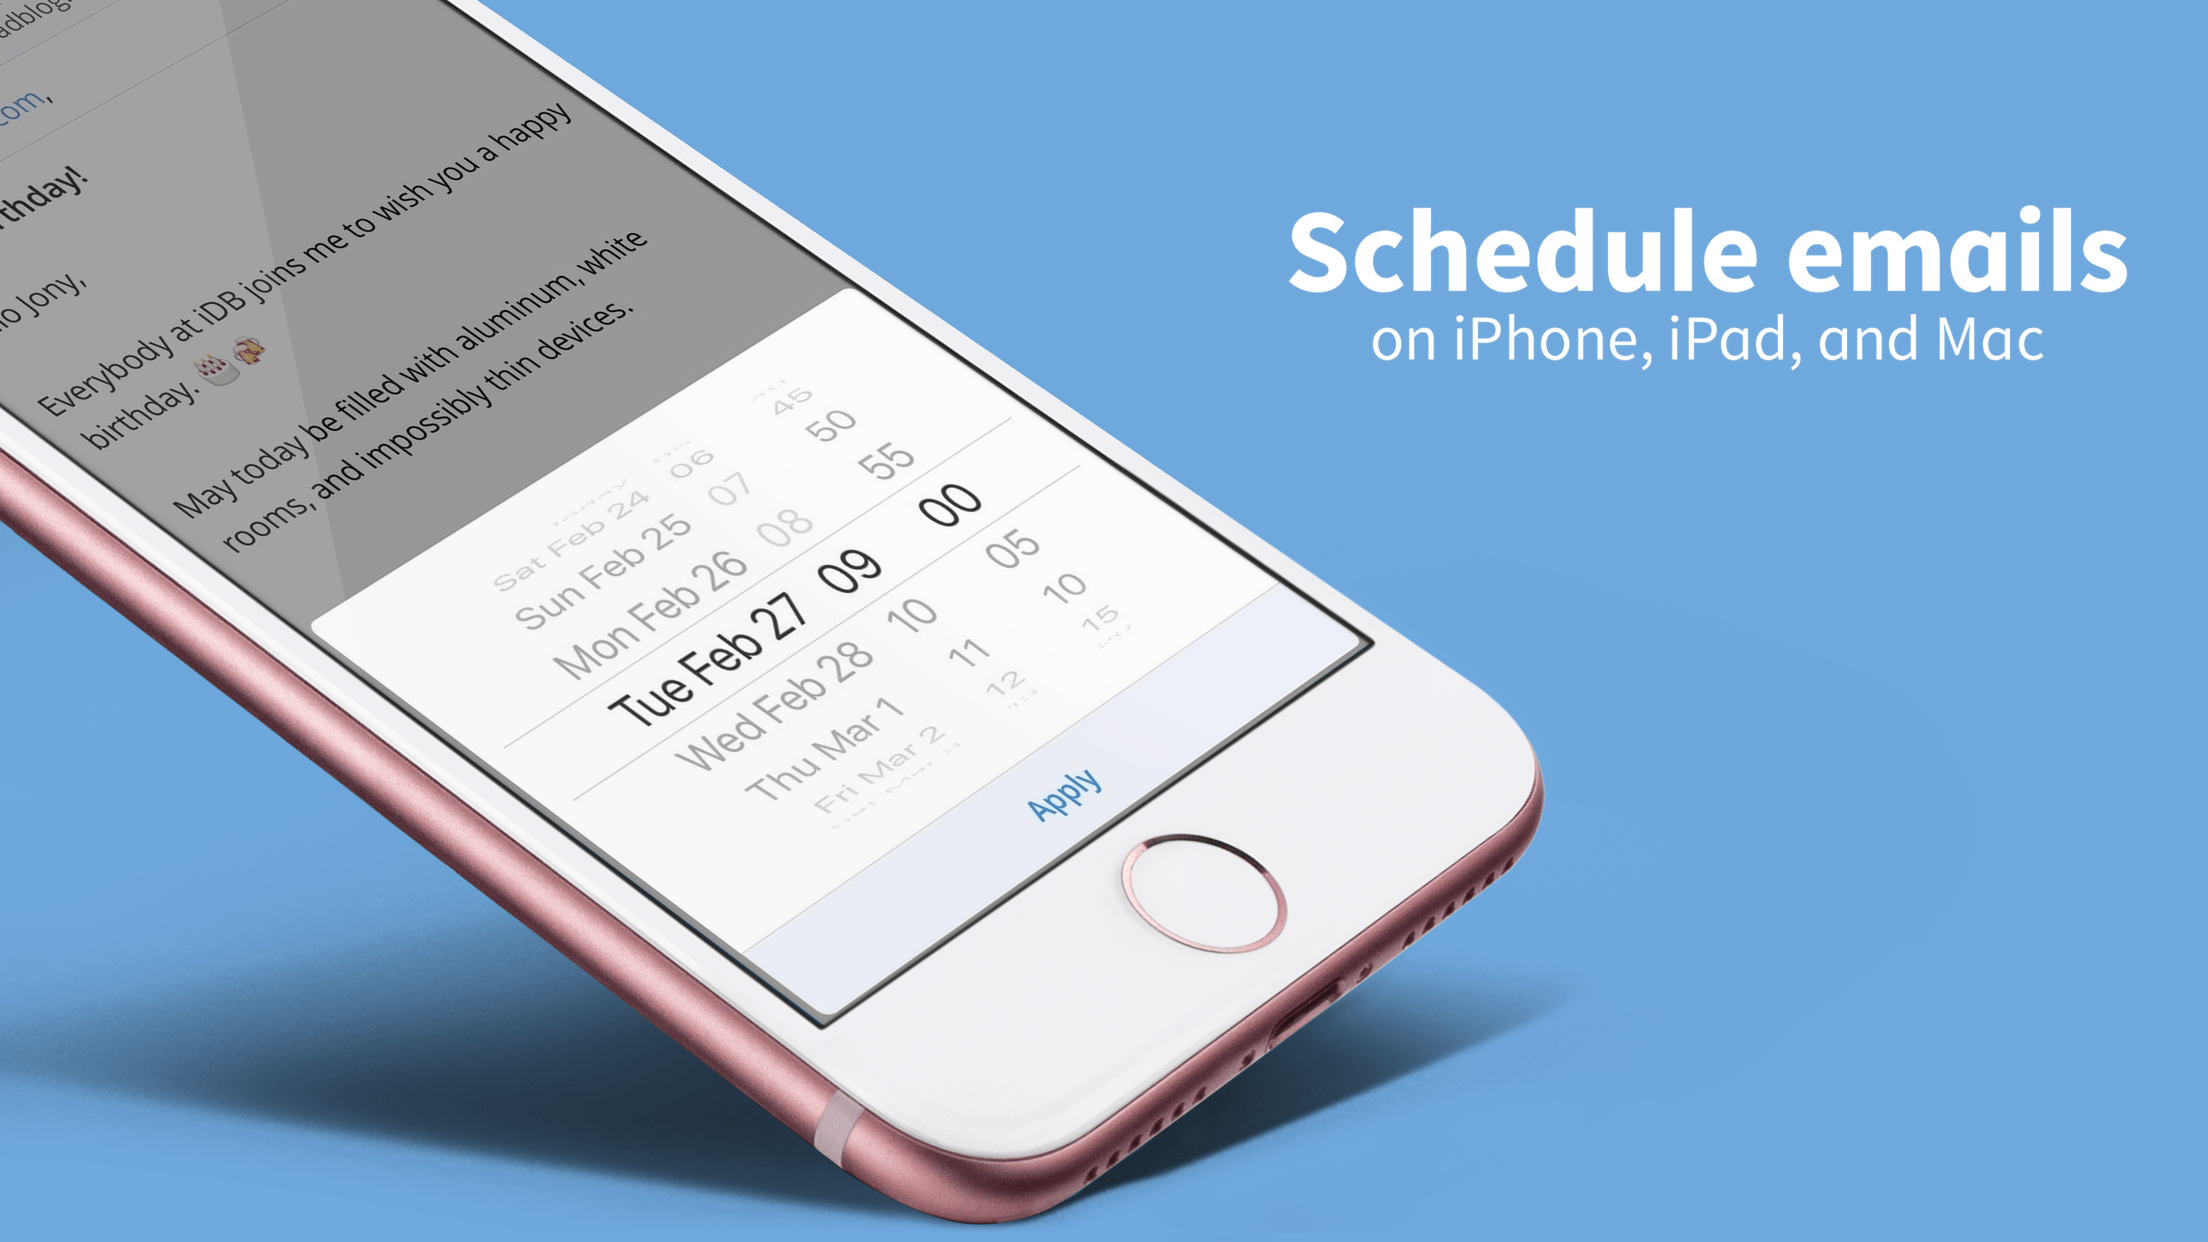 How to schedule emails on iPhone, iPad, Mac